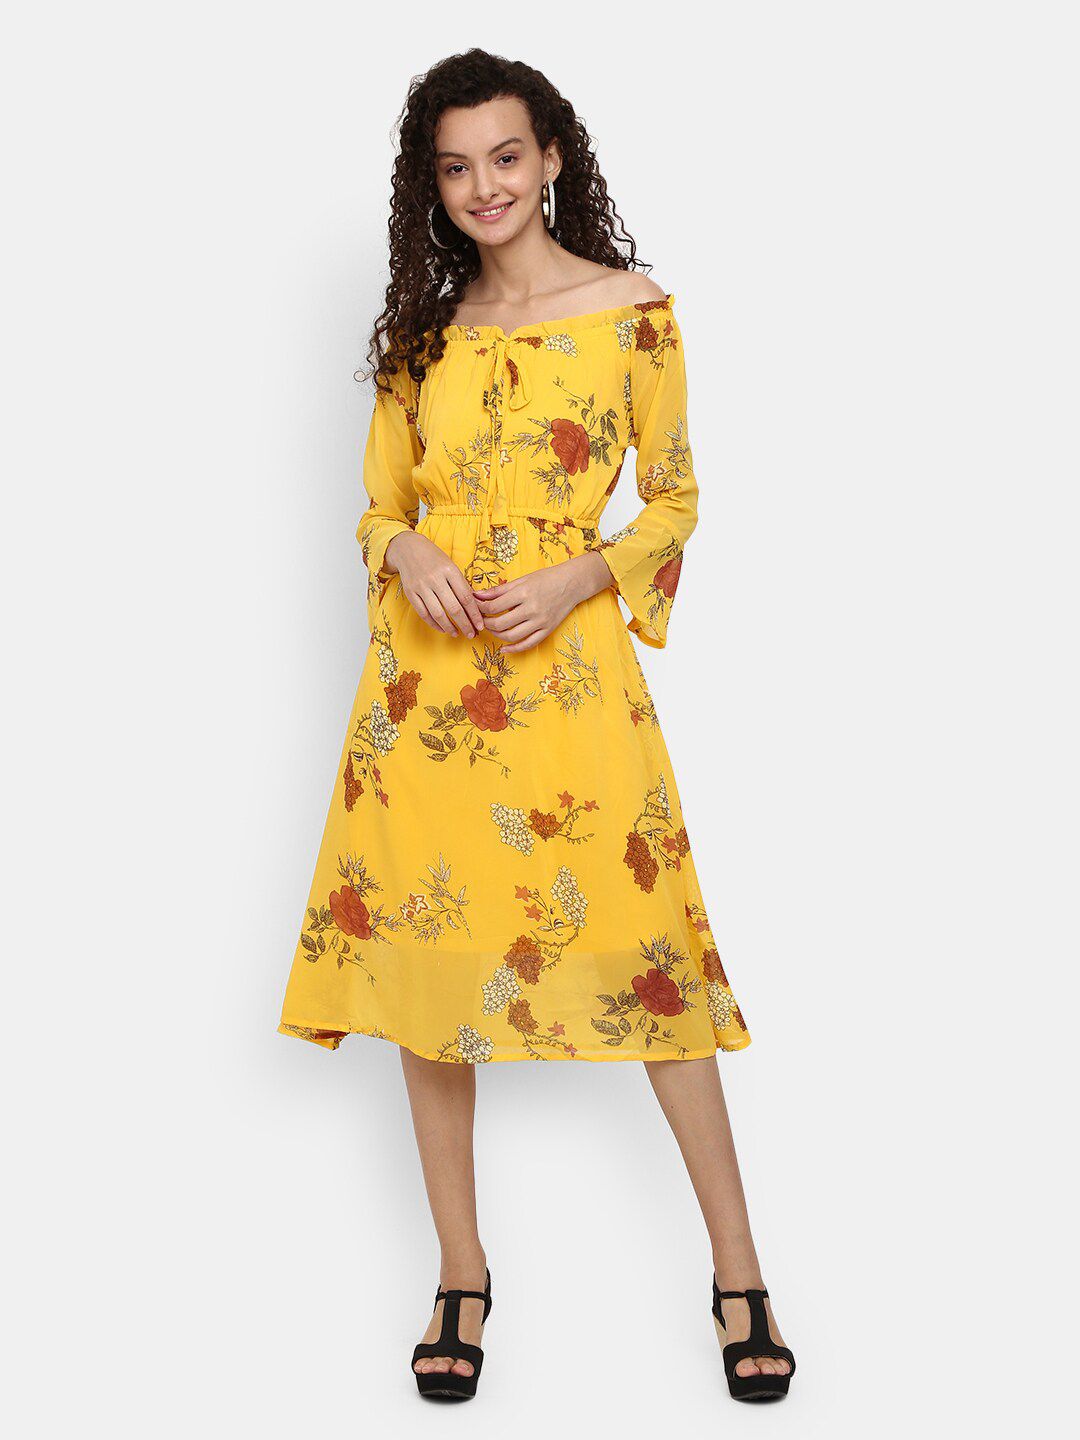 V-Mart Mustard Yellow Floral Printed Dress Price in India